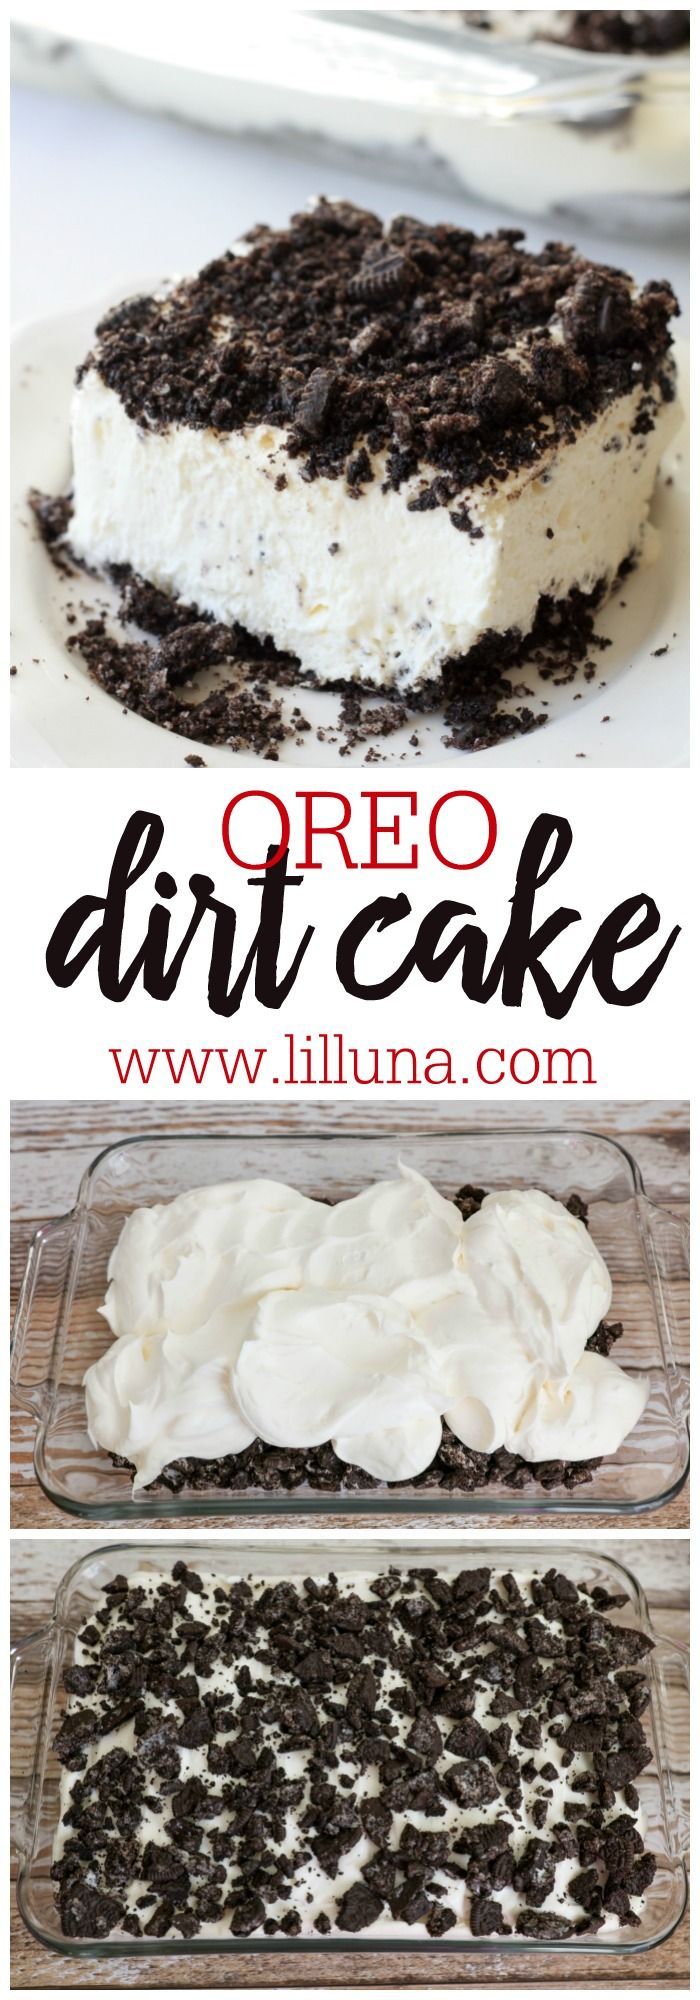 Oreo Dirt Cake – layers of creamy, white chocolate pudding, cream cheese, cool whip and more and topped of